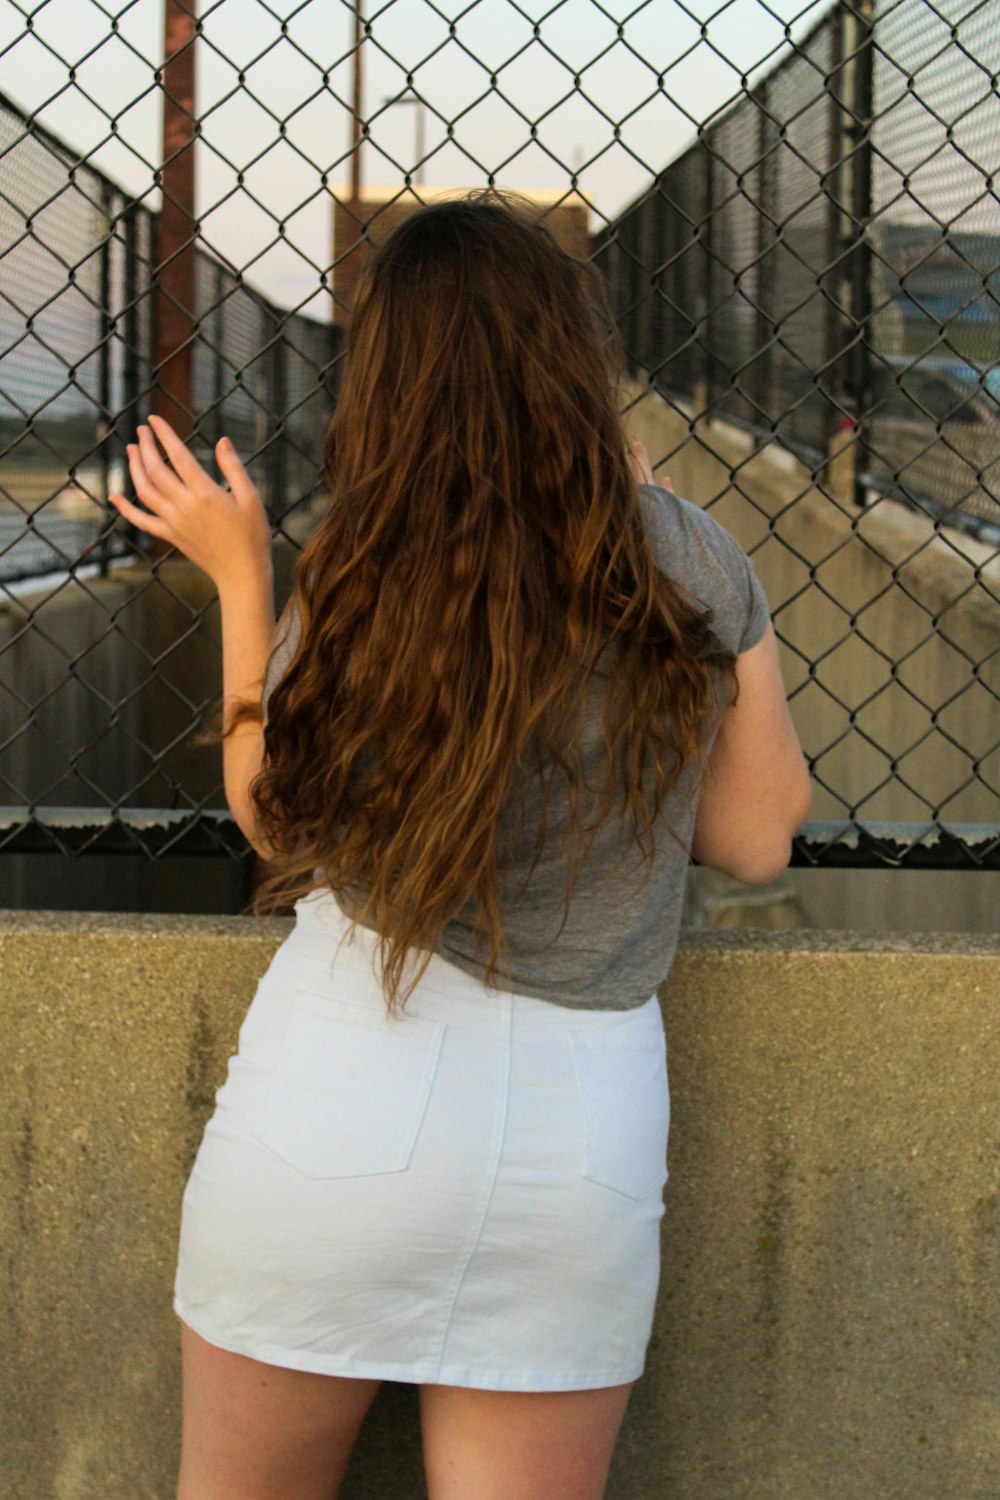 woman wearing white denim skirt and gray shirt holding on black cyclone fence